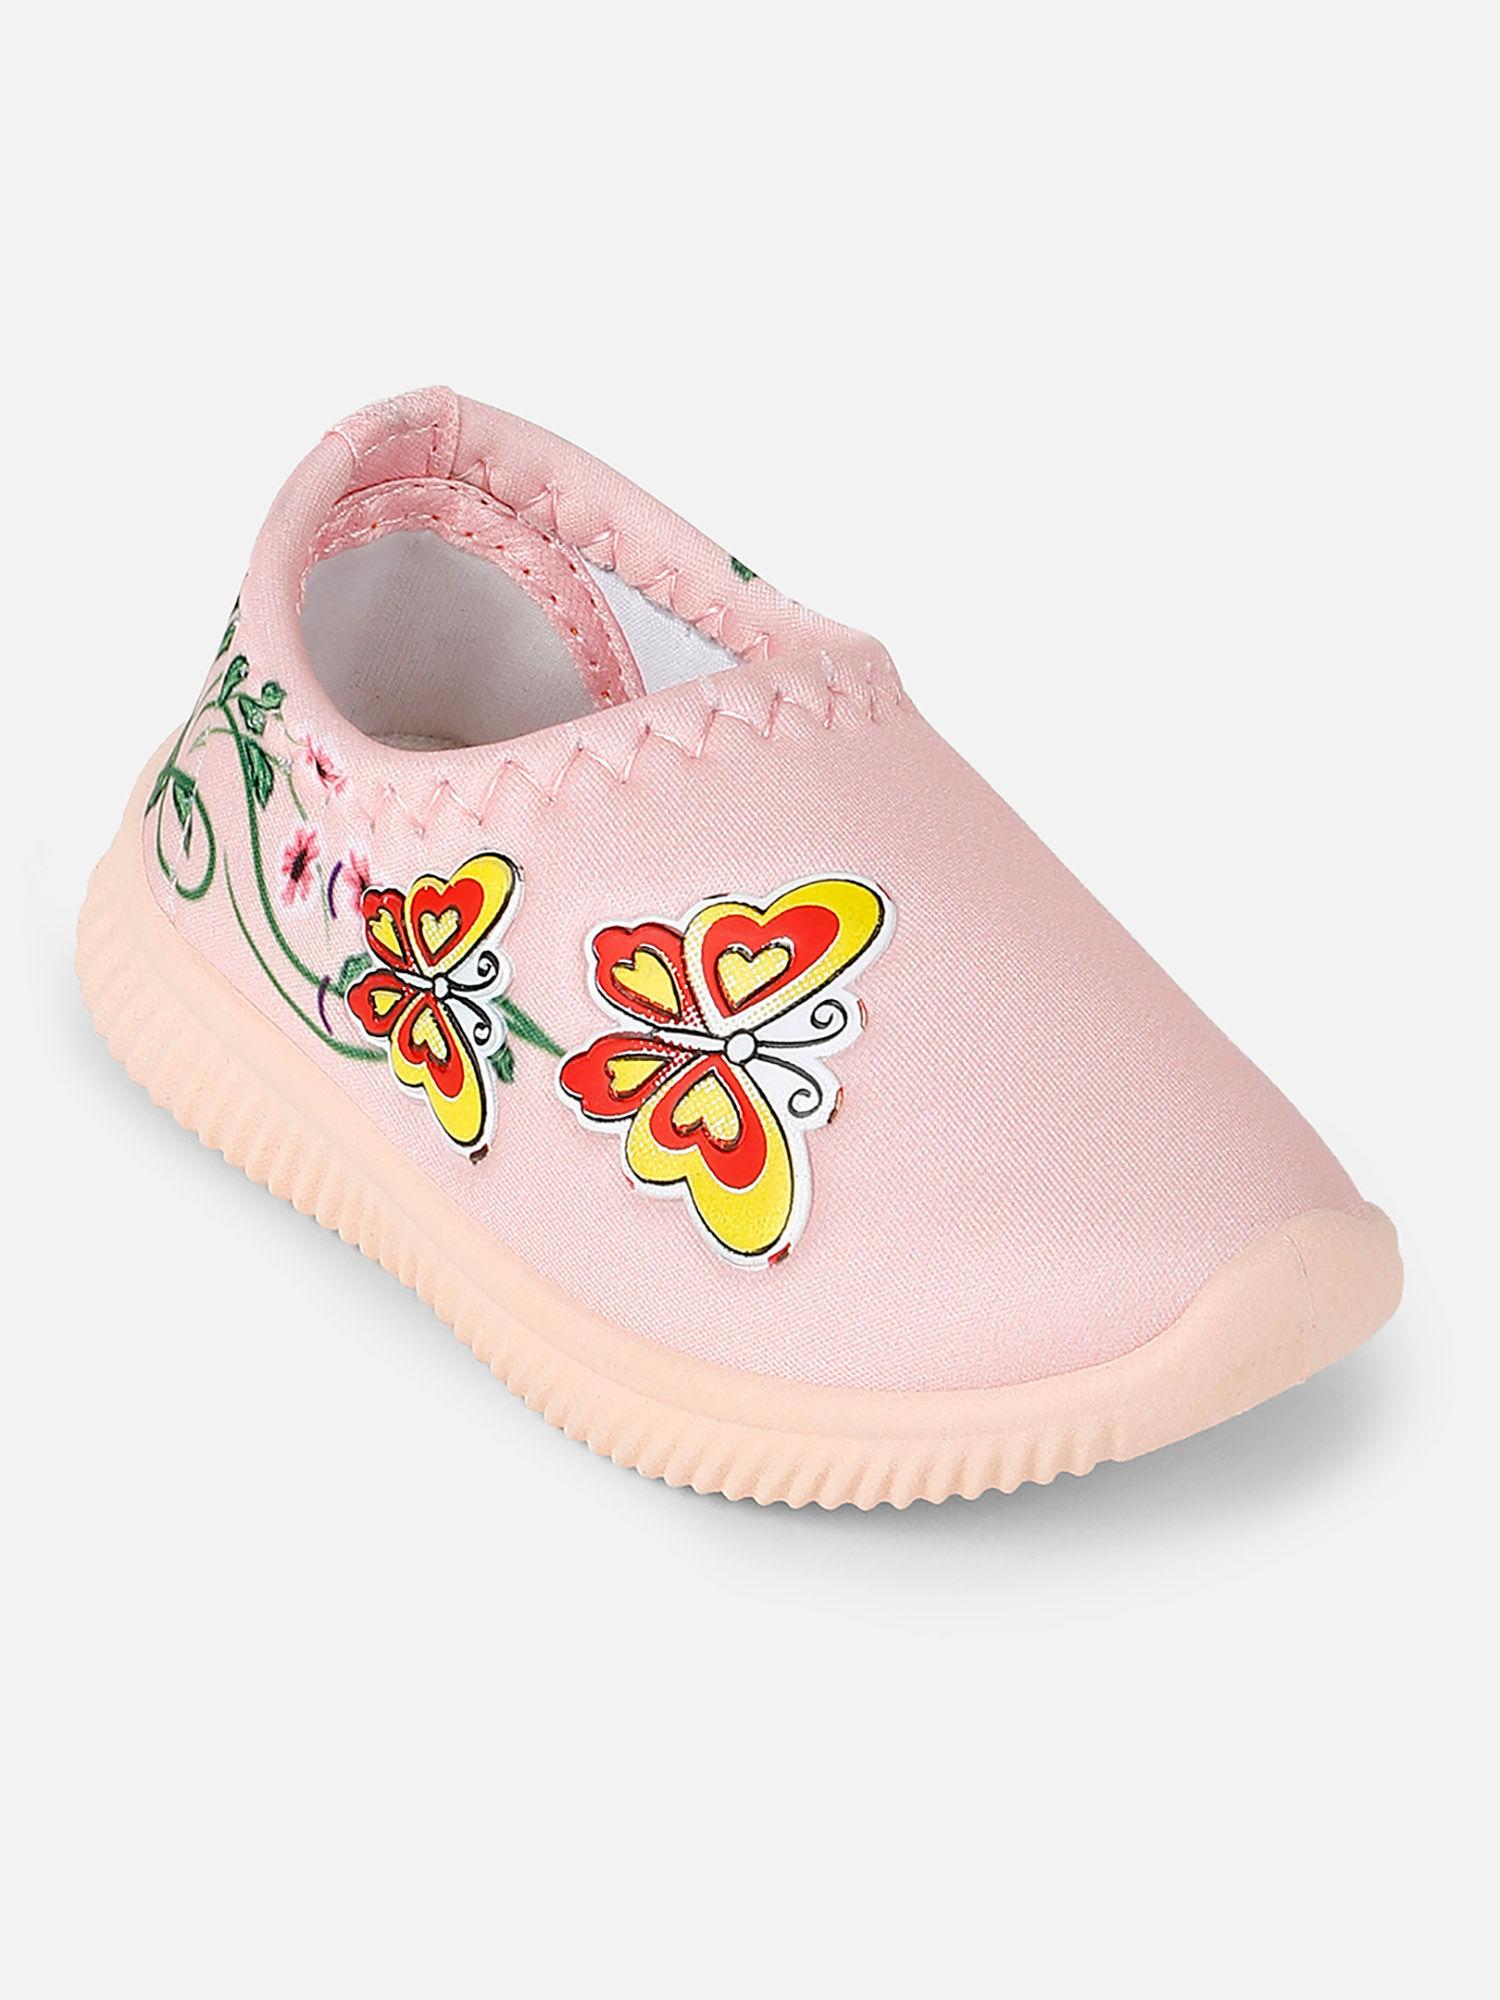 featured peach shoes